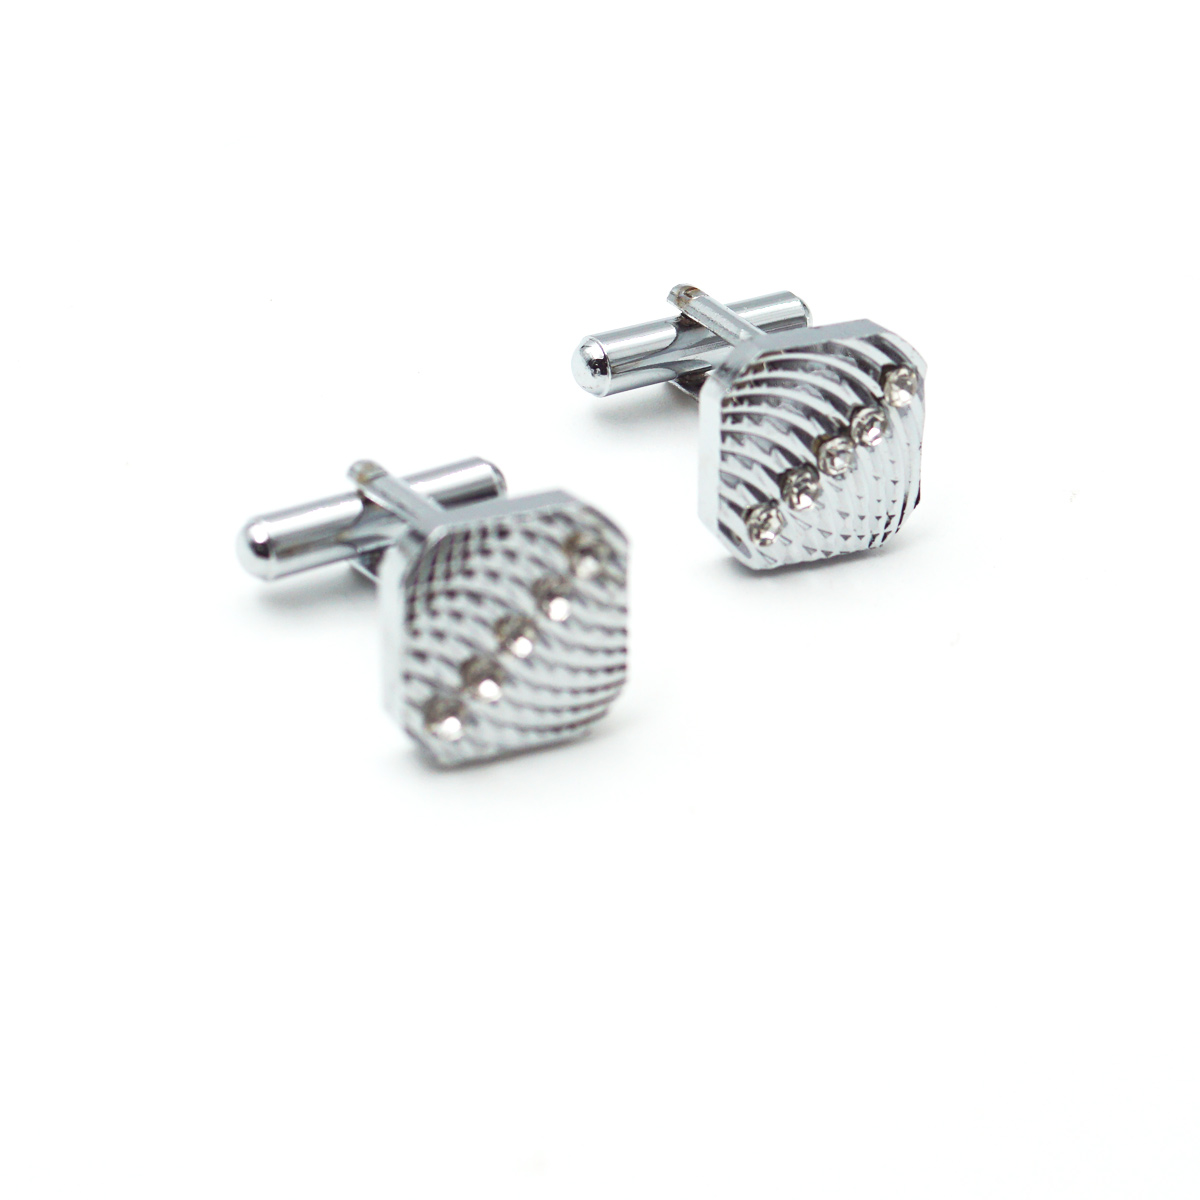 penhose.in Silver With White Stone Cufflinks For Men SKU 87334